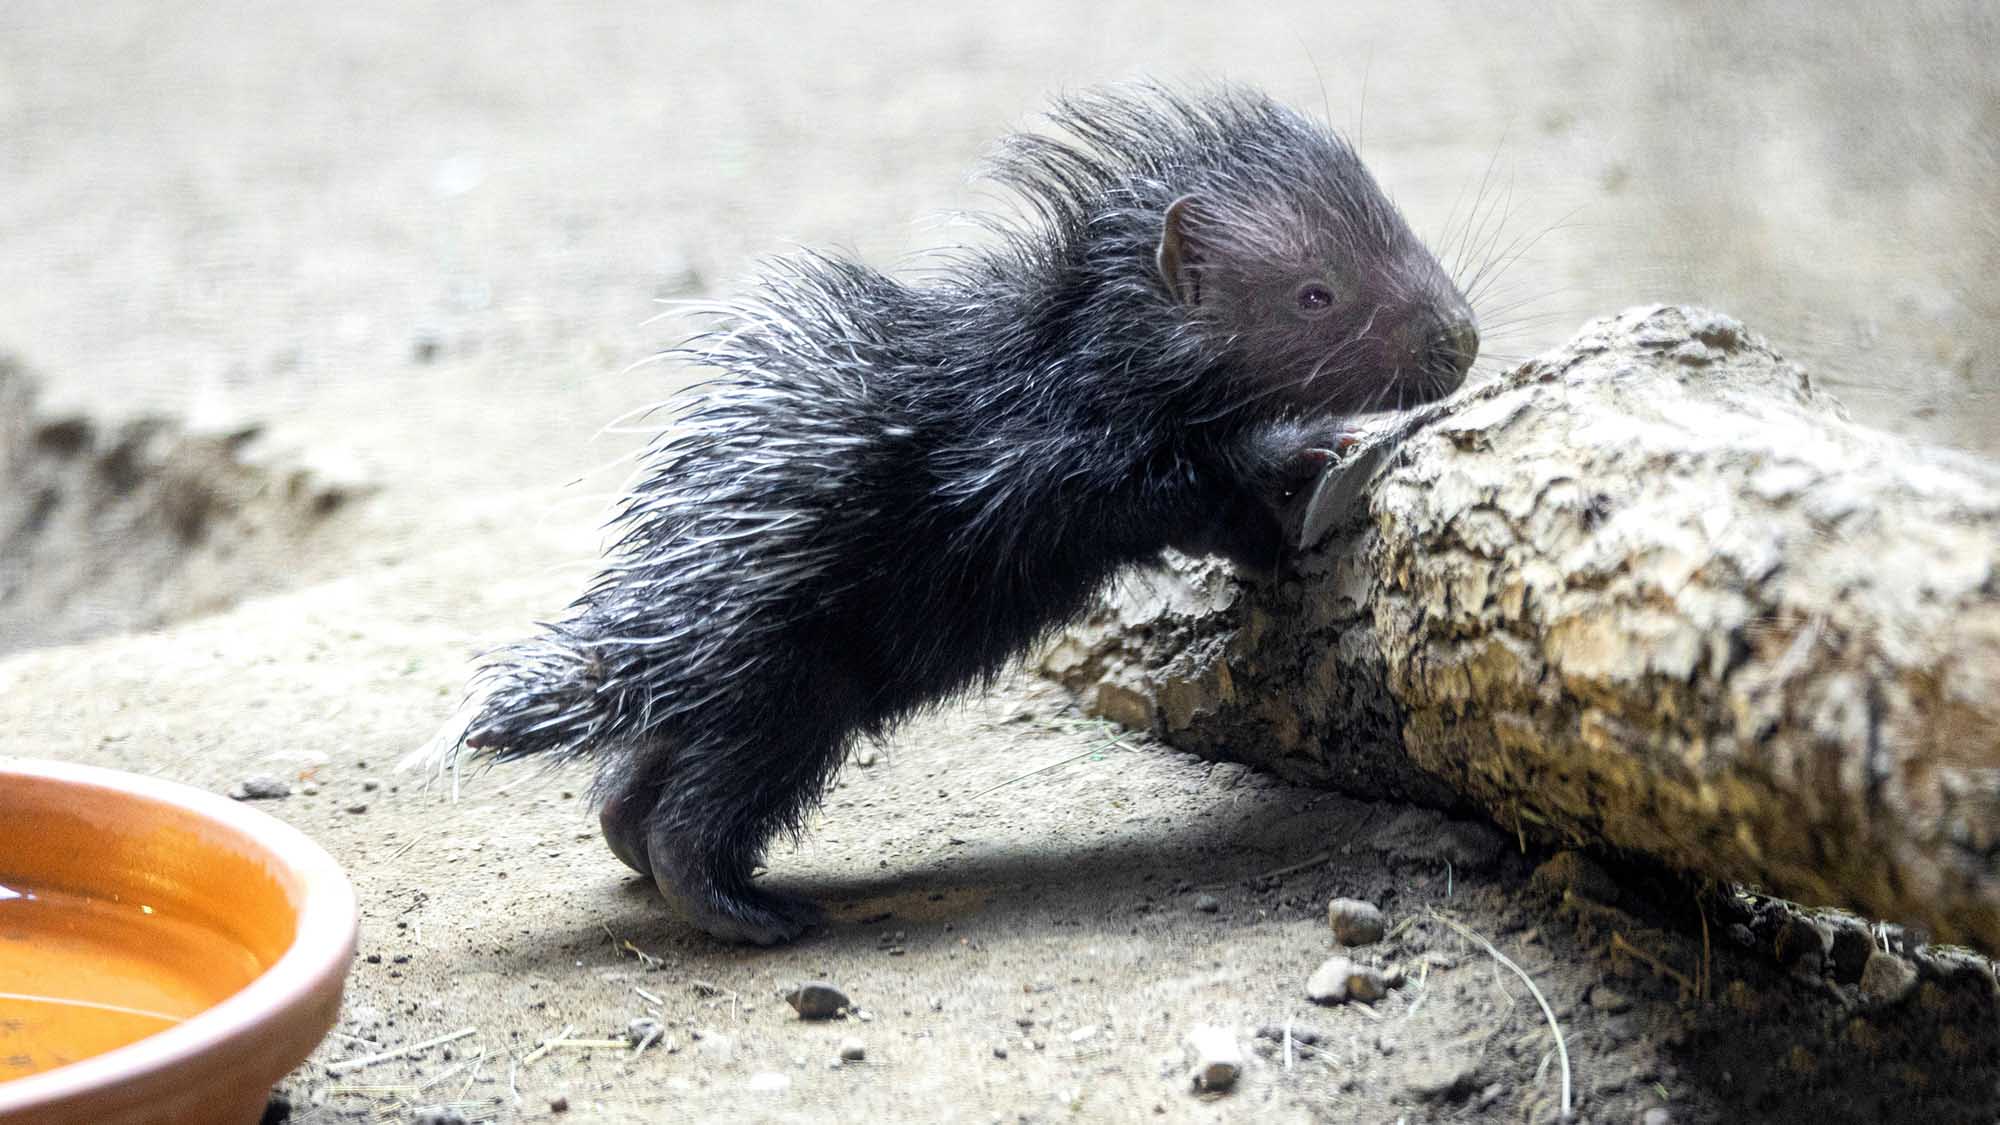 How Was This Cute Baby Porcupine Conceived? Very Very Carefully Say Experts